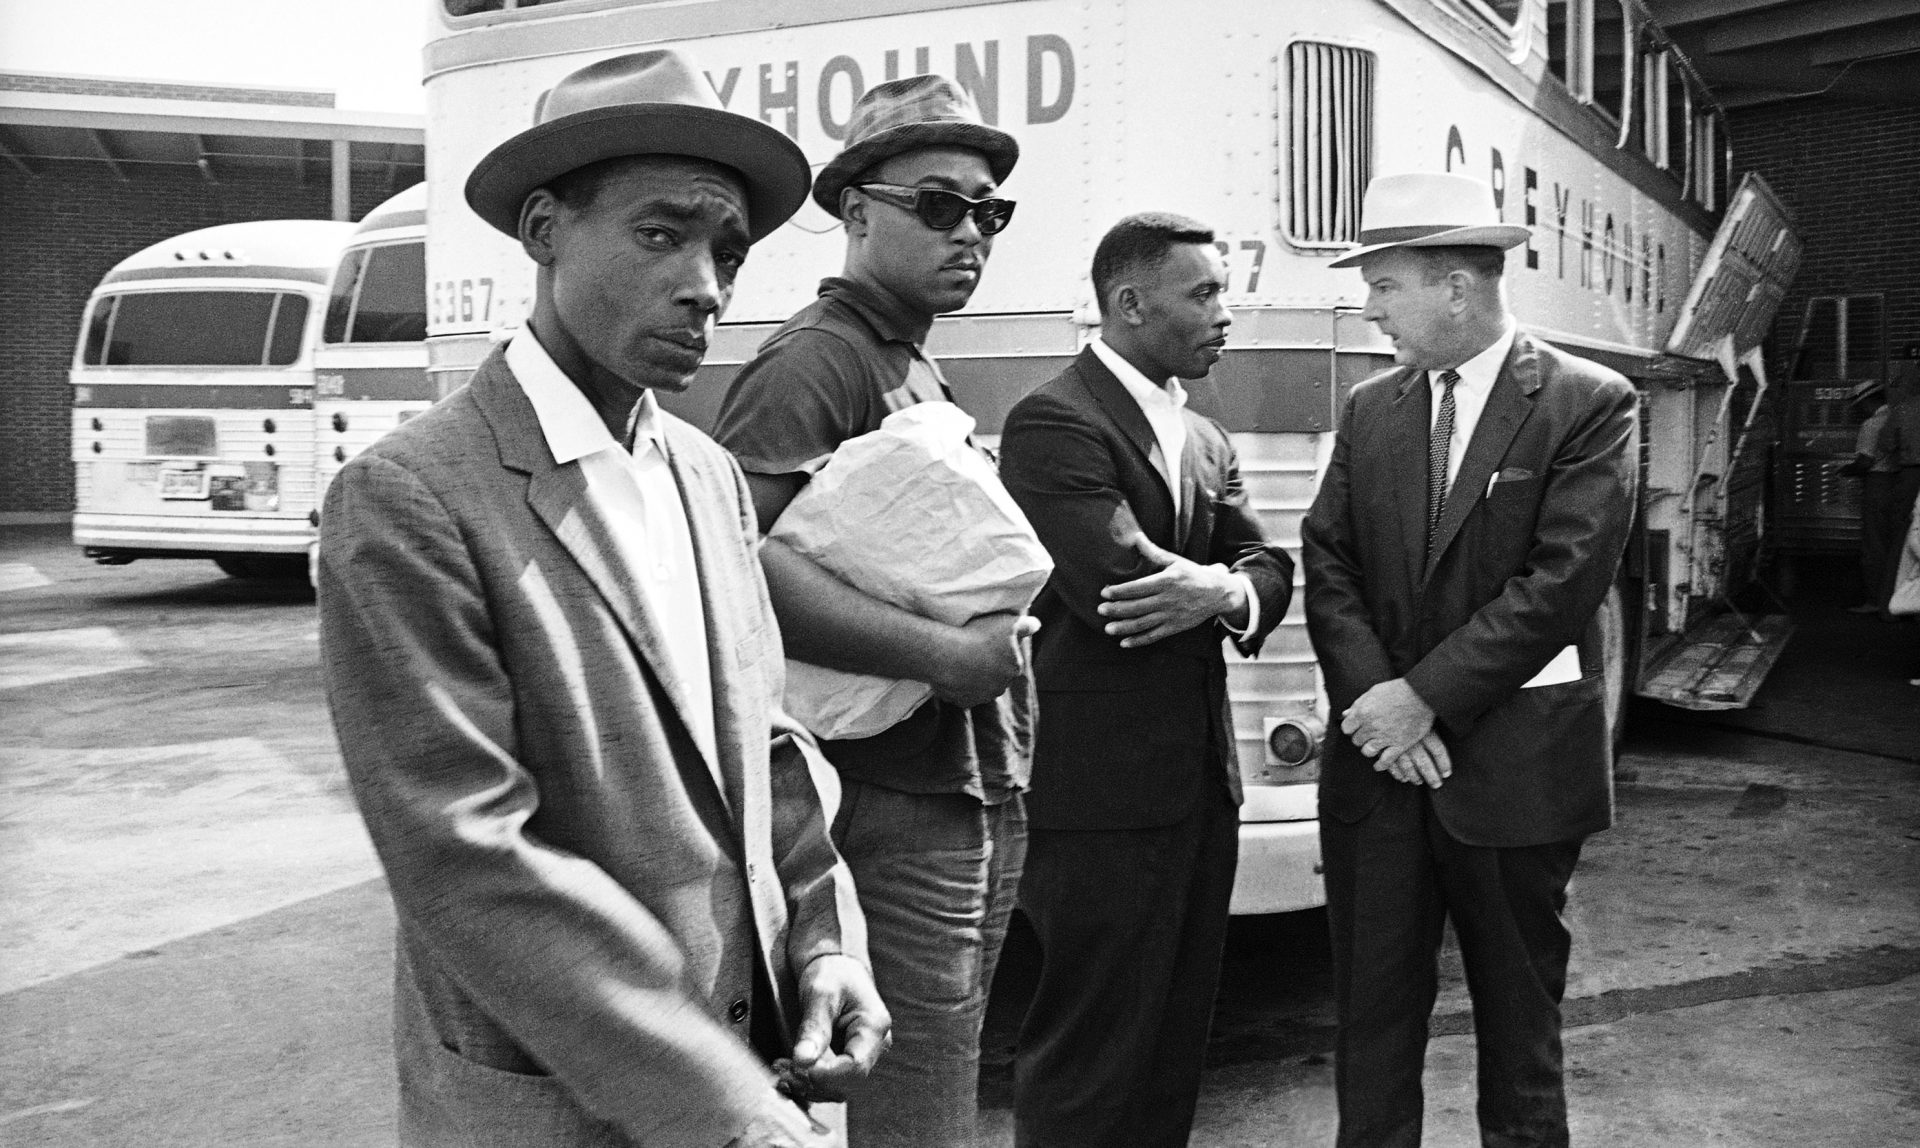 The Reverse Freedom Riders Eddie Rose, Almer Payton and Willie Ramsey are shown with Citizens Council director George Singlemann.